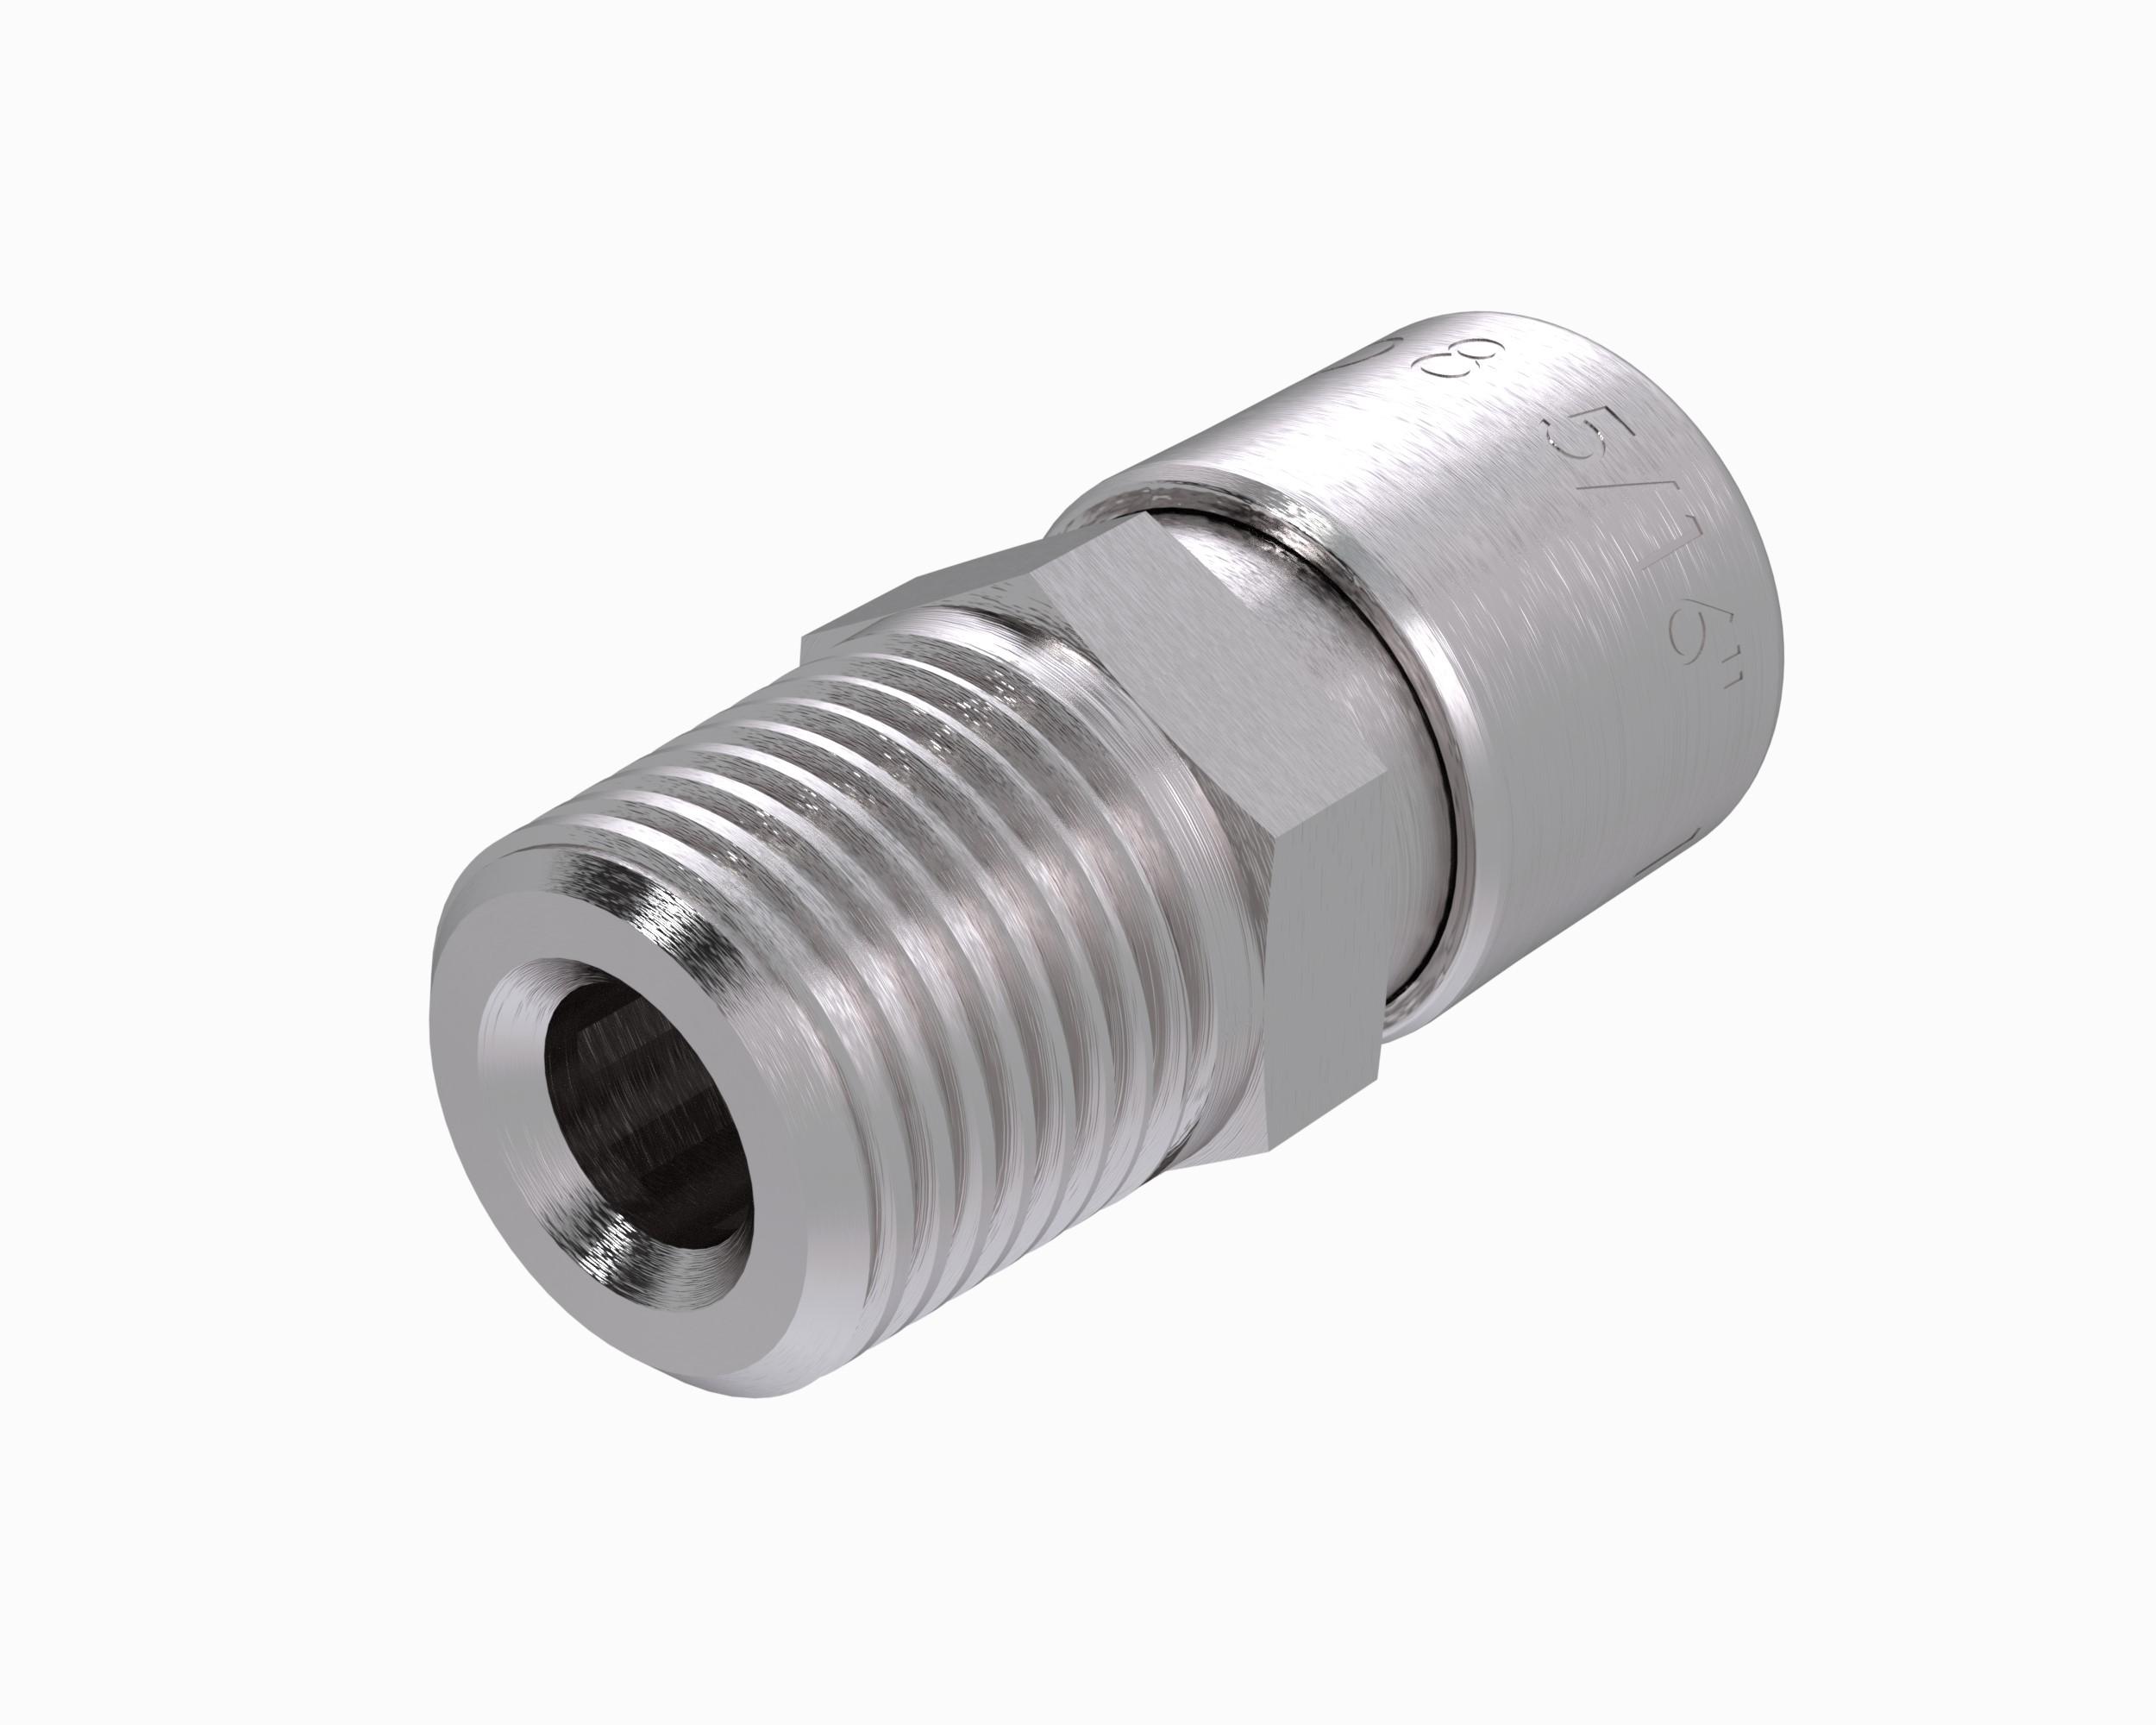 Straight Push To Connect Tube Fitting, Double Seal, Stainless STl, NPT Thread X Inch Tube  - INOXLINE©